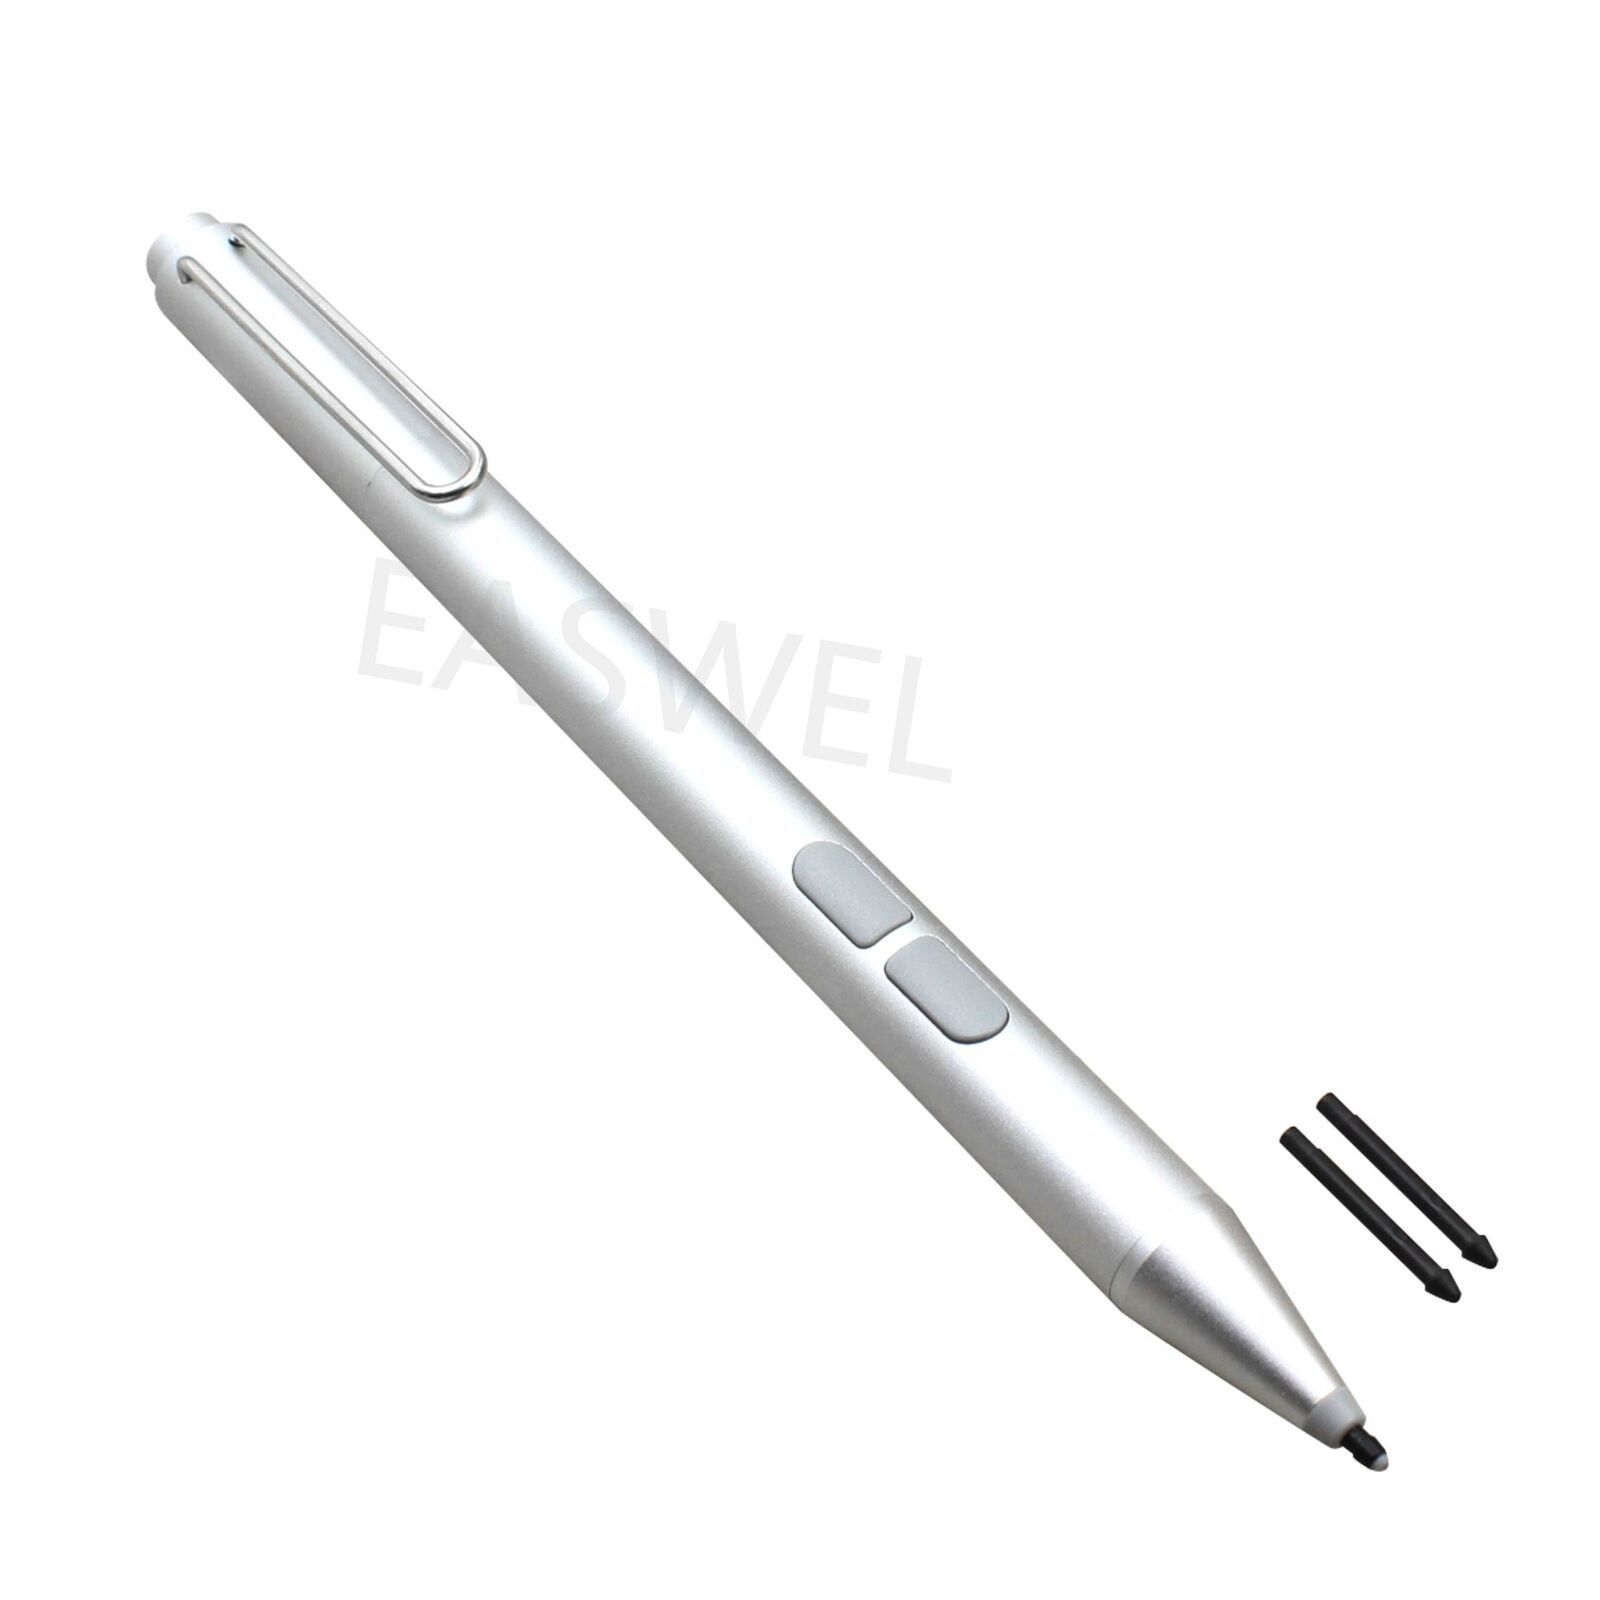 Primary image for Microsoft Surface Pen Stylus For Surface Pro 3 4 5 6 7 Laptop Accessories Parts